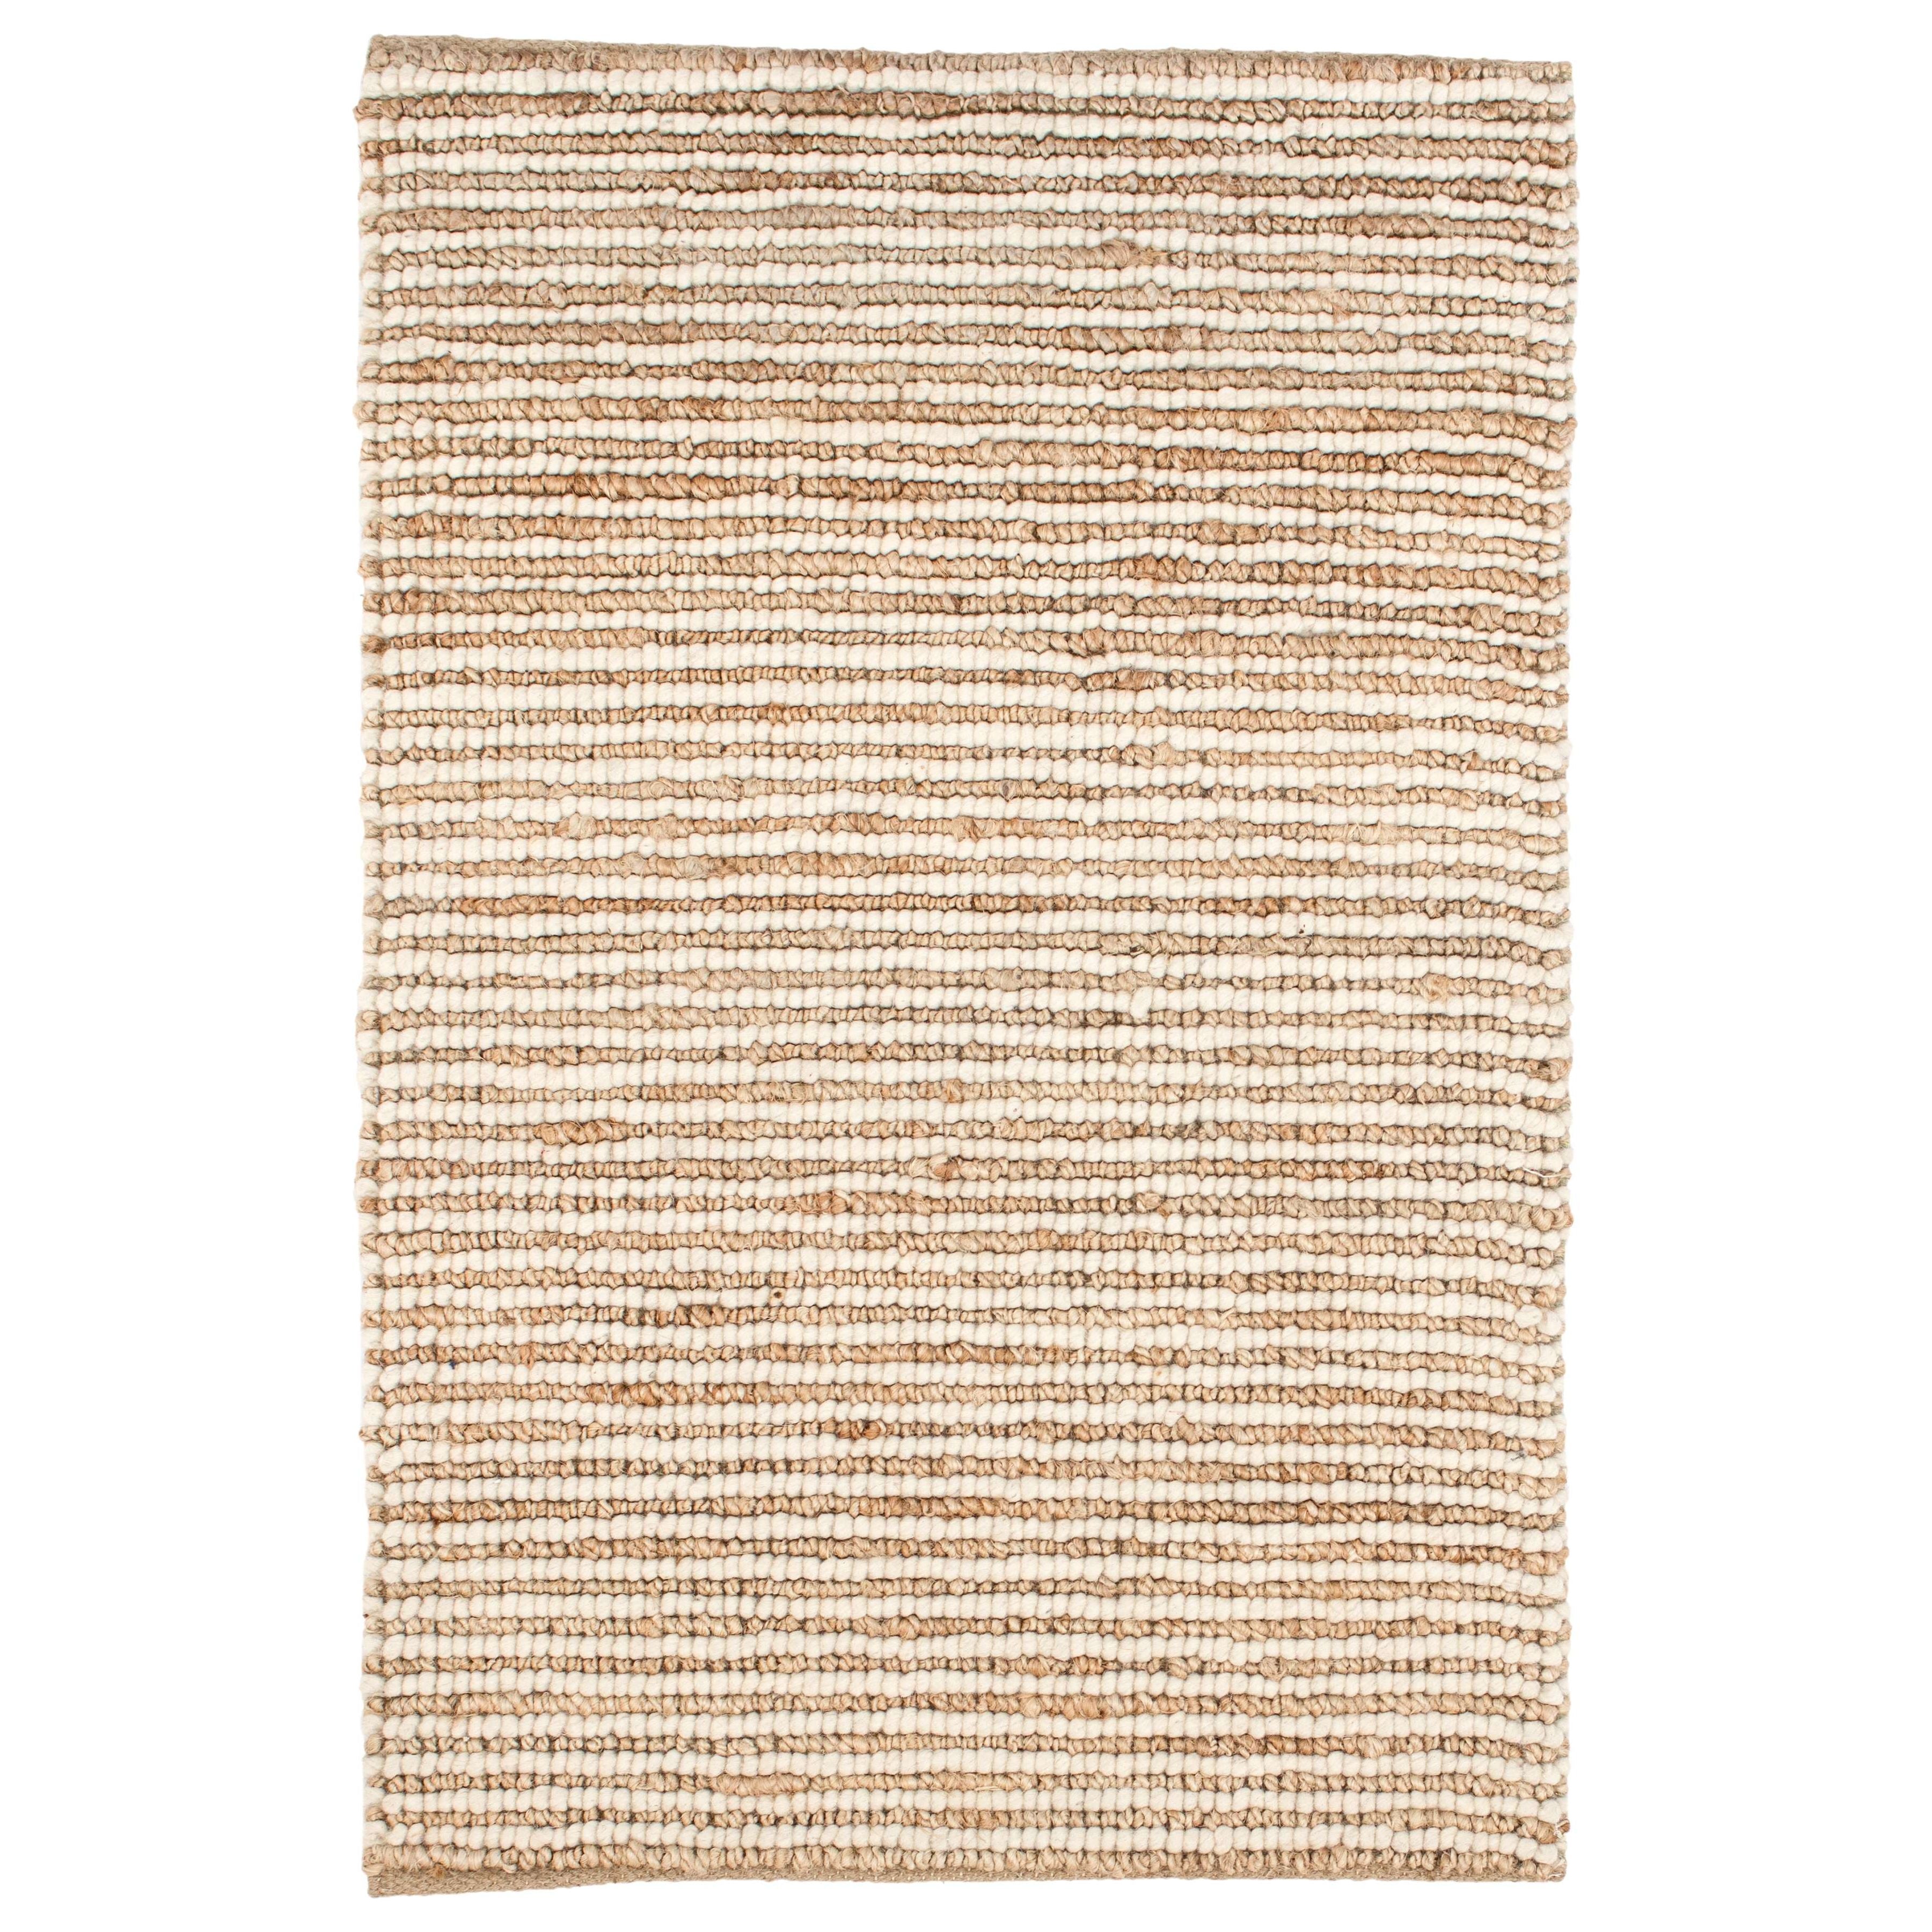 Like stripes of bark layered with ivory this rug brings rustic earthy charm to any interior. Low profile with dramatic texture in hardworking naturally colored jute for durability and ivory wool for warmth, Twiggy can grace any room with natural, understated style. From our <a href="/c/bunny-williams-rugs">Bunny Williams collection</a>. Amethyst Home provides interior design, new construction, custom furniture, and area rugs in the Tampa metro area.